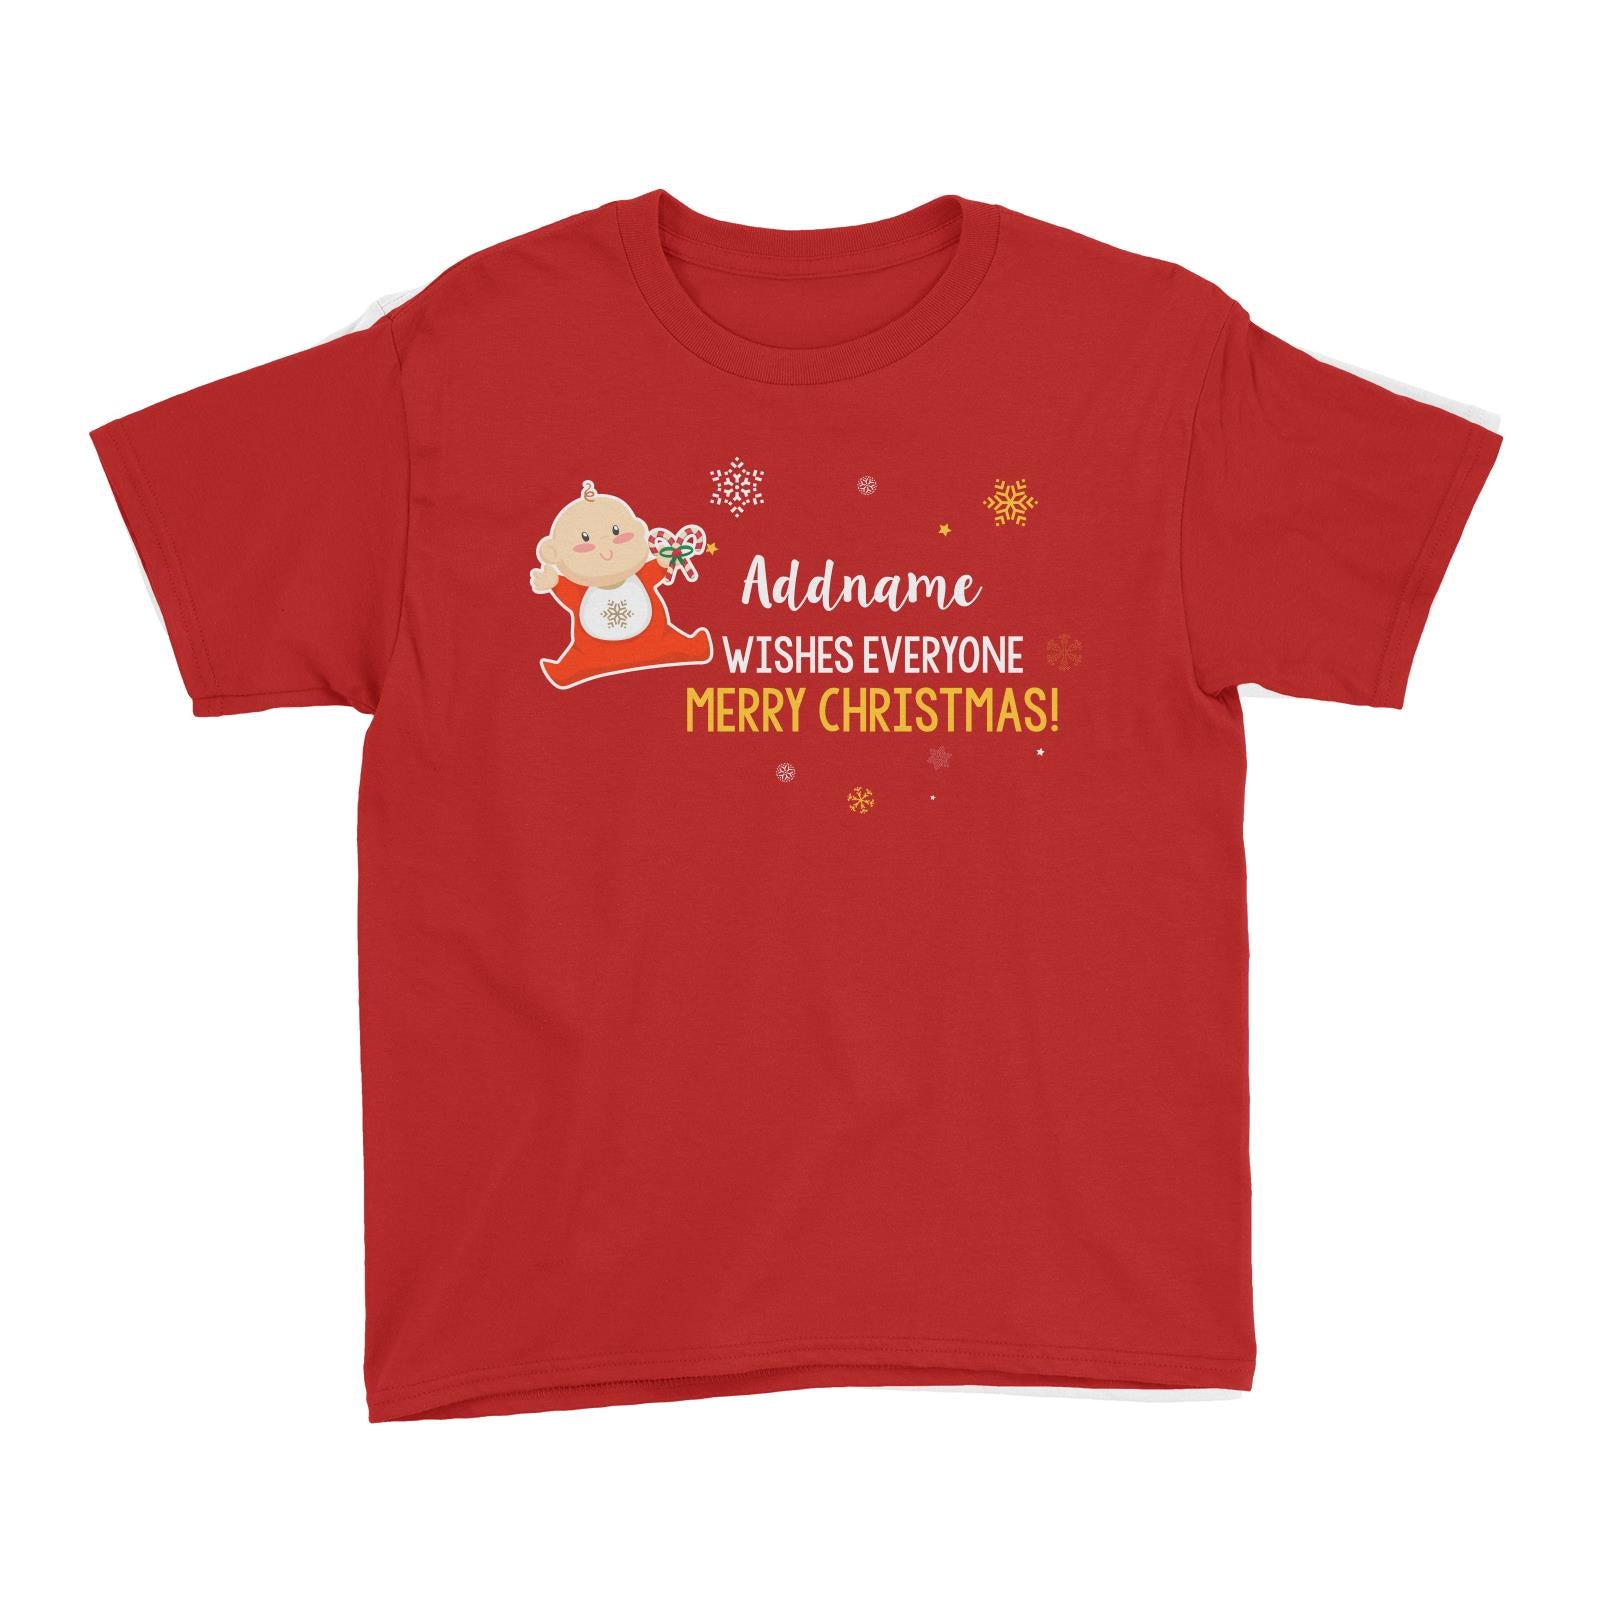 Cute Elf Baby Wishes Everyone Merry Christmas Addname Kid's T-Shirt  Matching Family Personalizable Designs